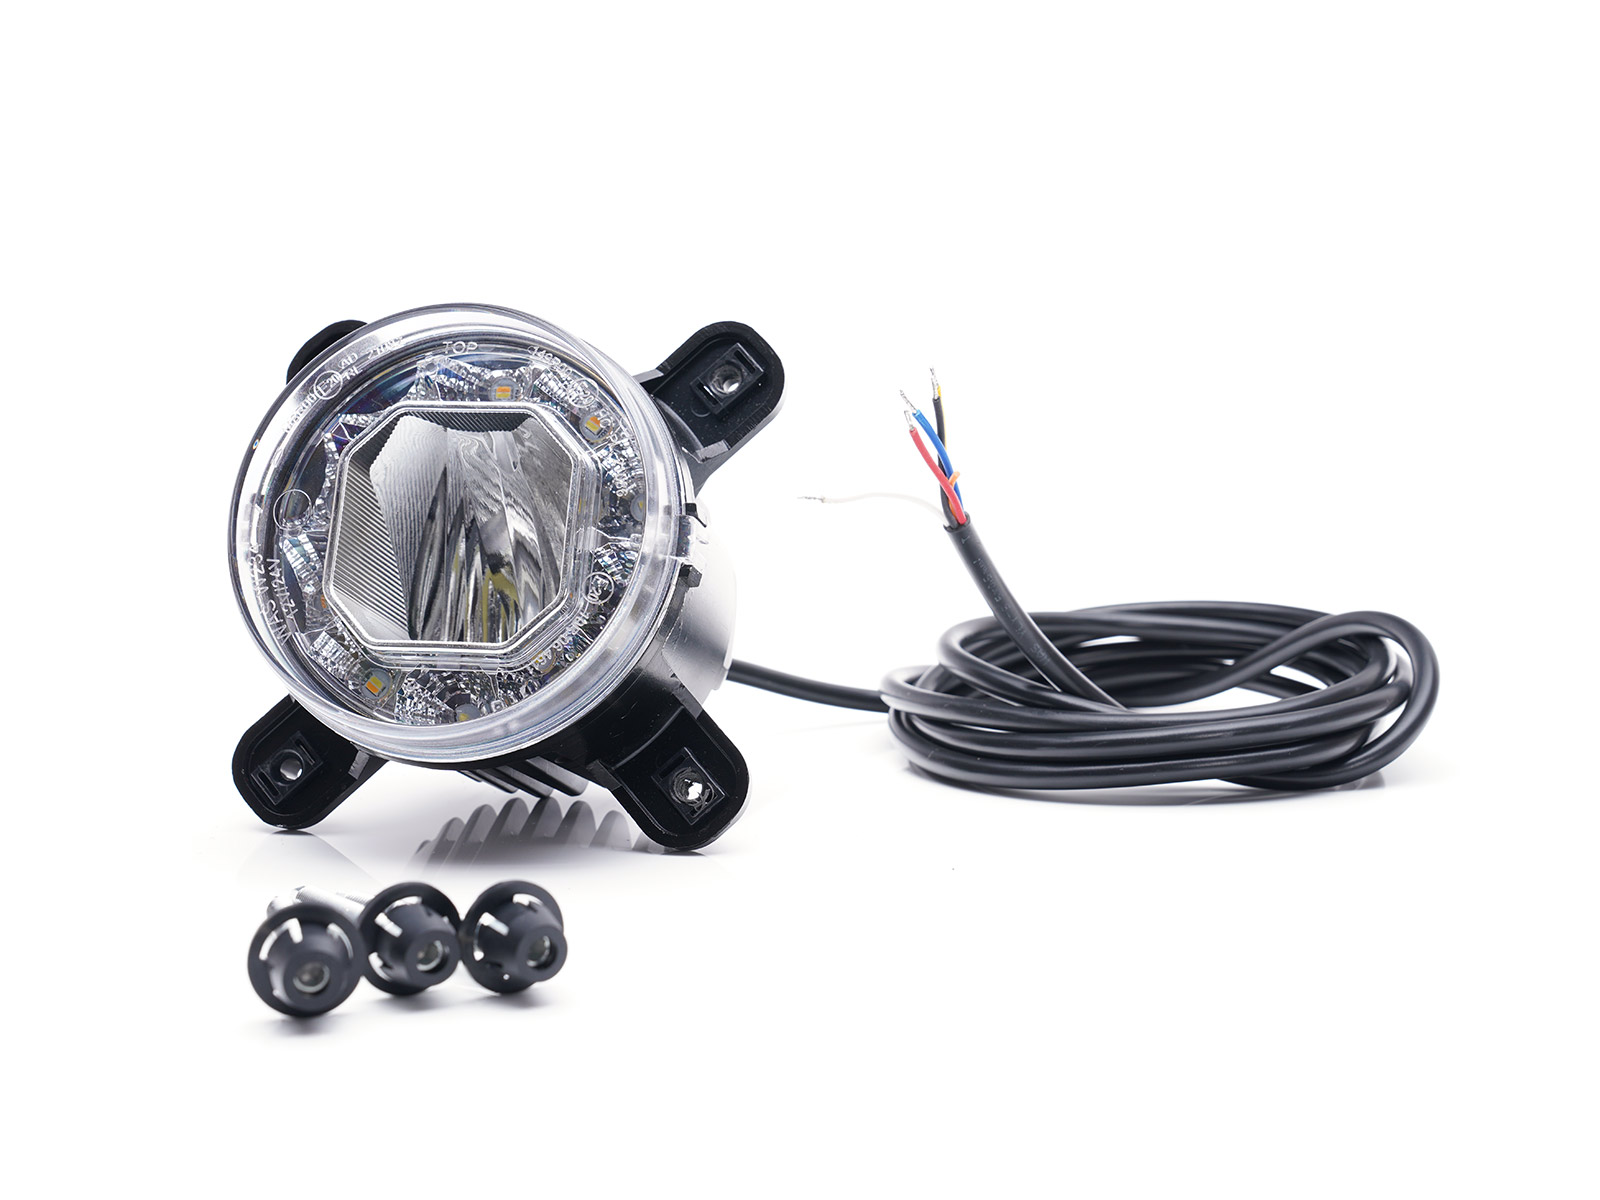 Multifunctional front lamps - W234, W235